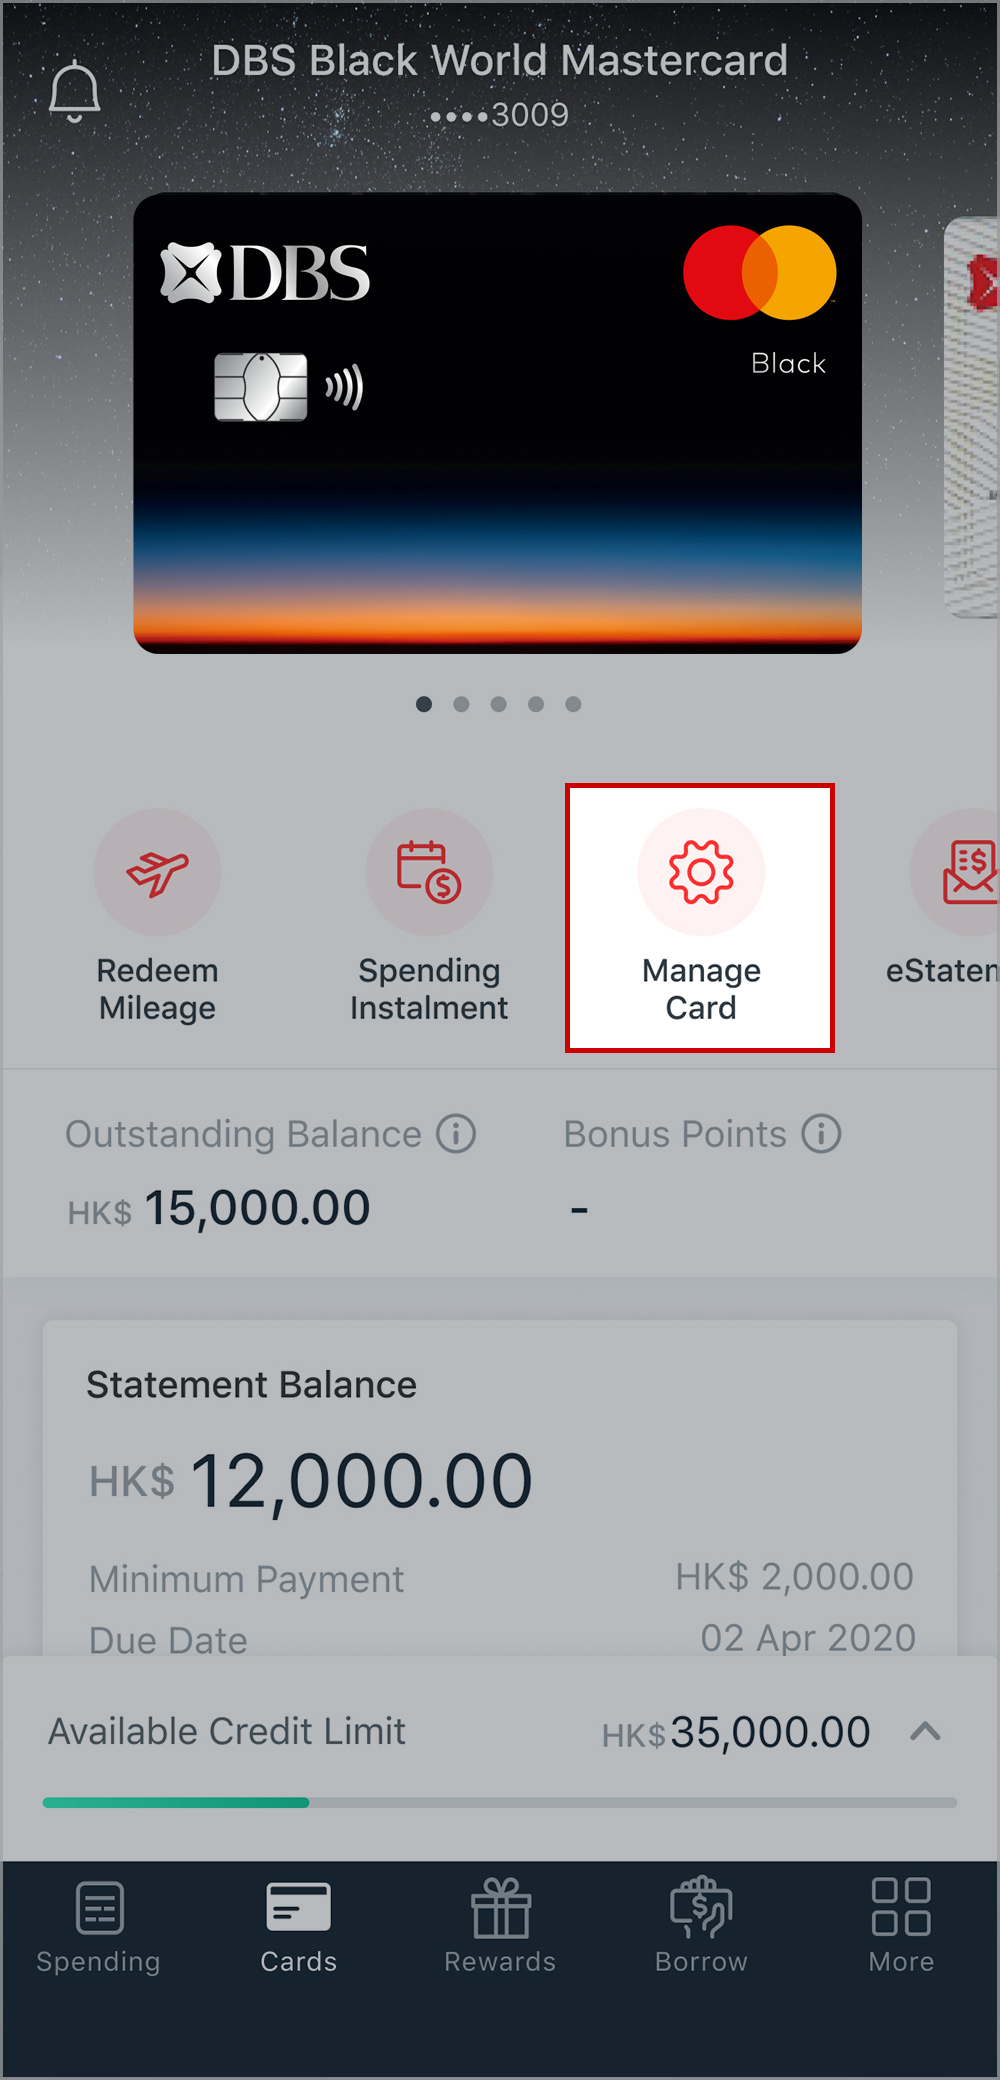 Tap on “Manage Card” under Card